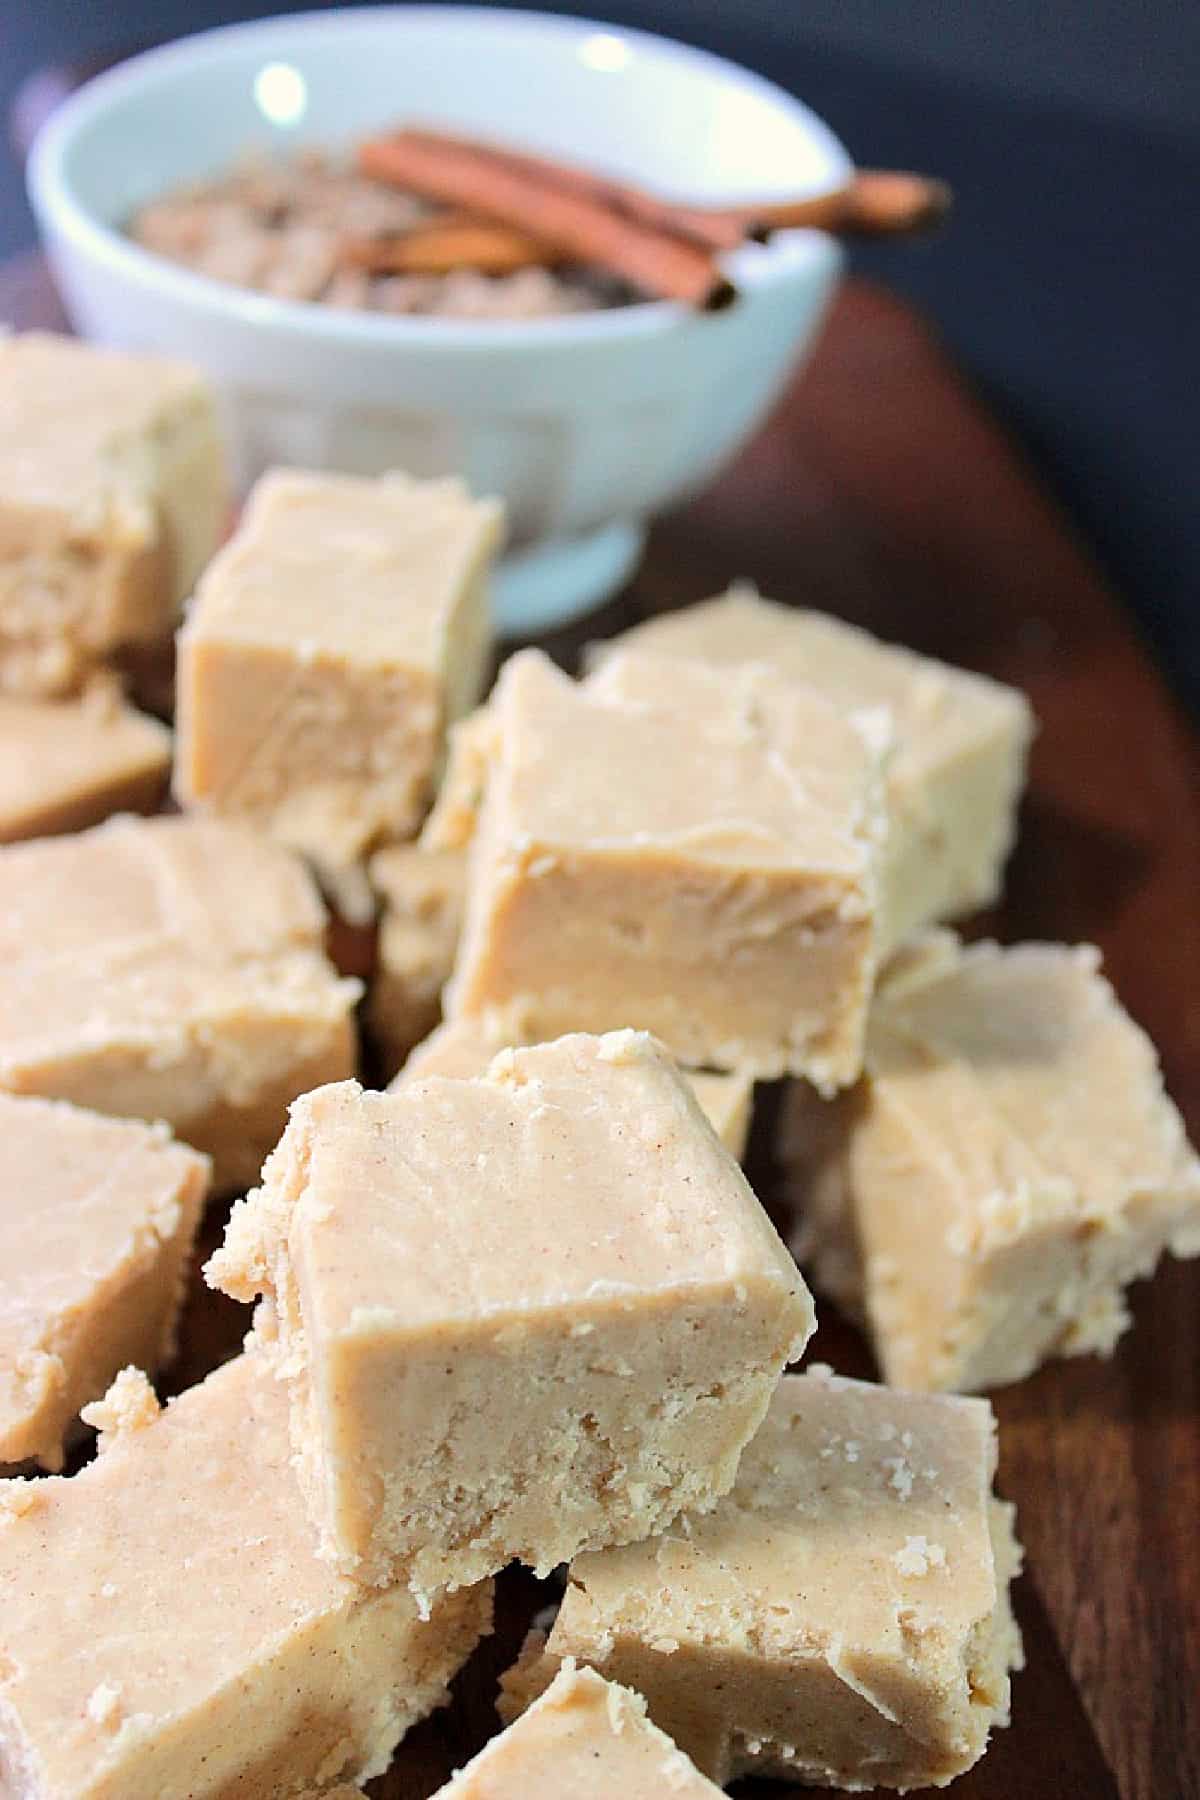 A closeup photo of a stack of Cinnamon Fudge in the foreground and some cinnamon sticks in the background.